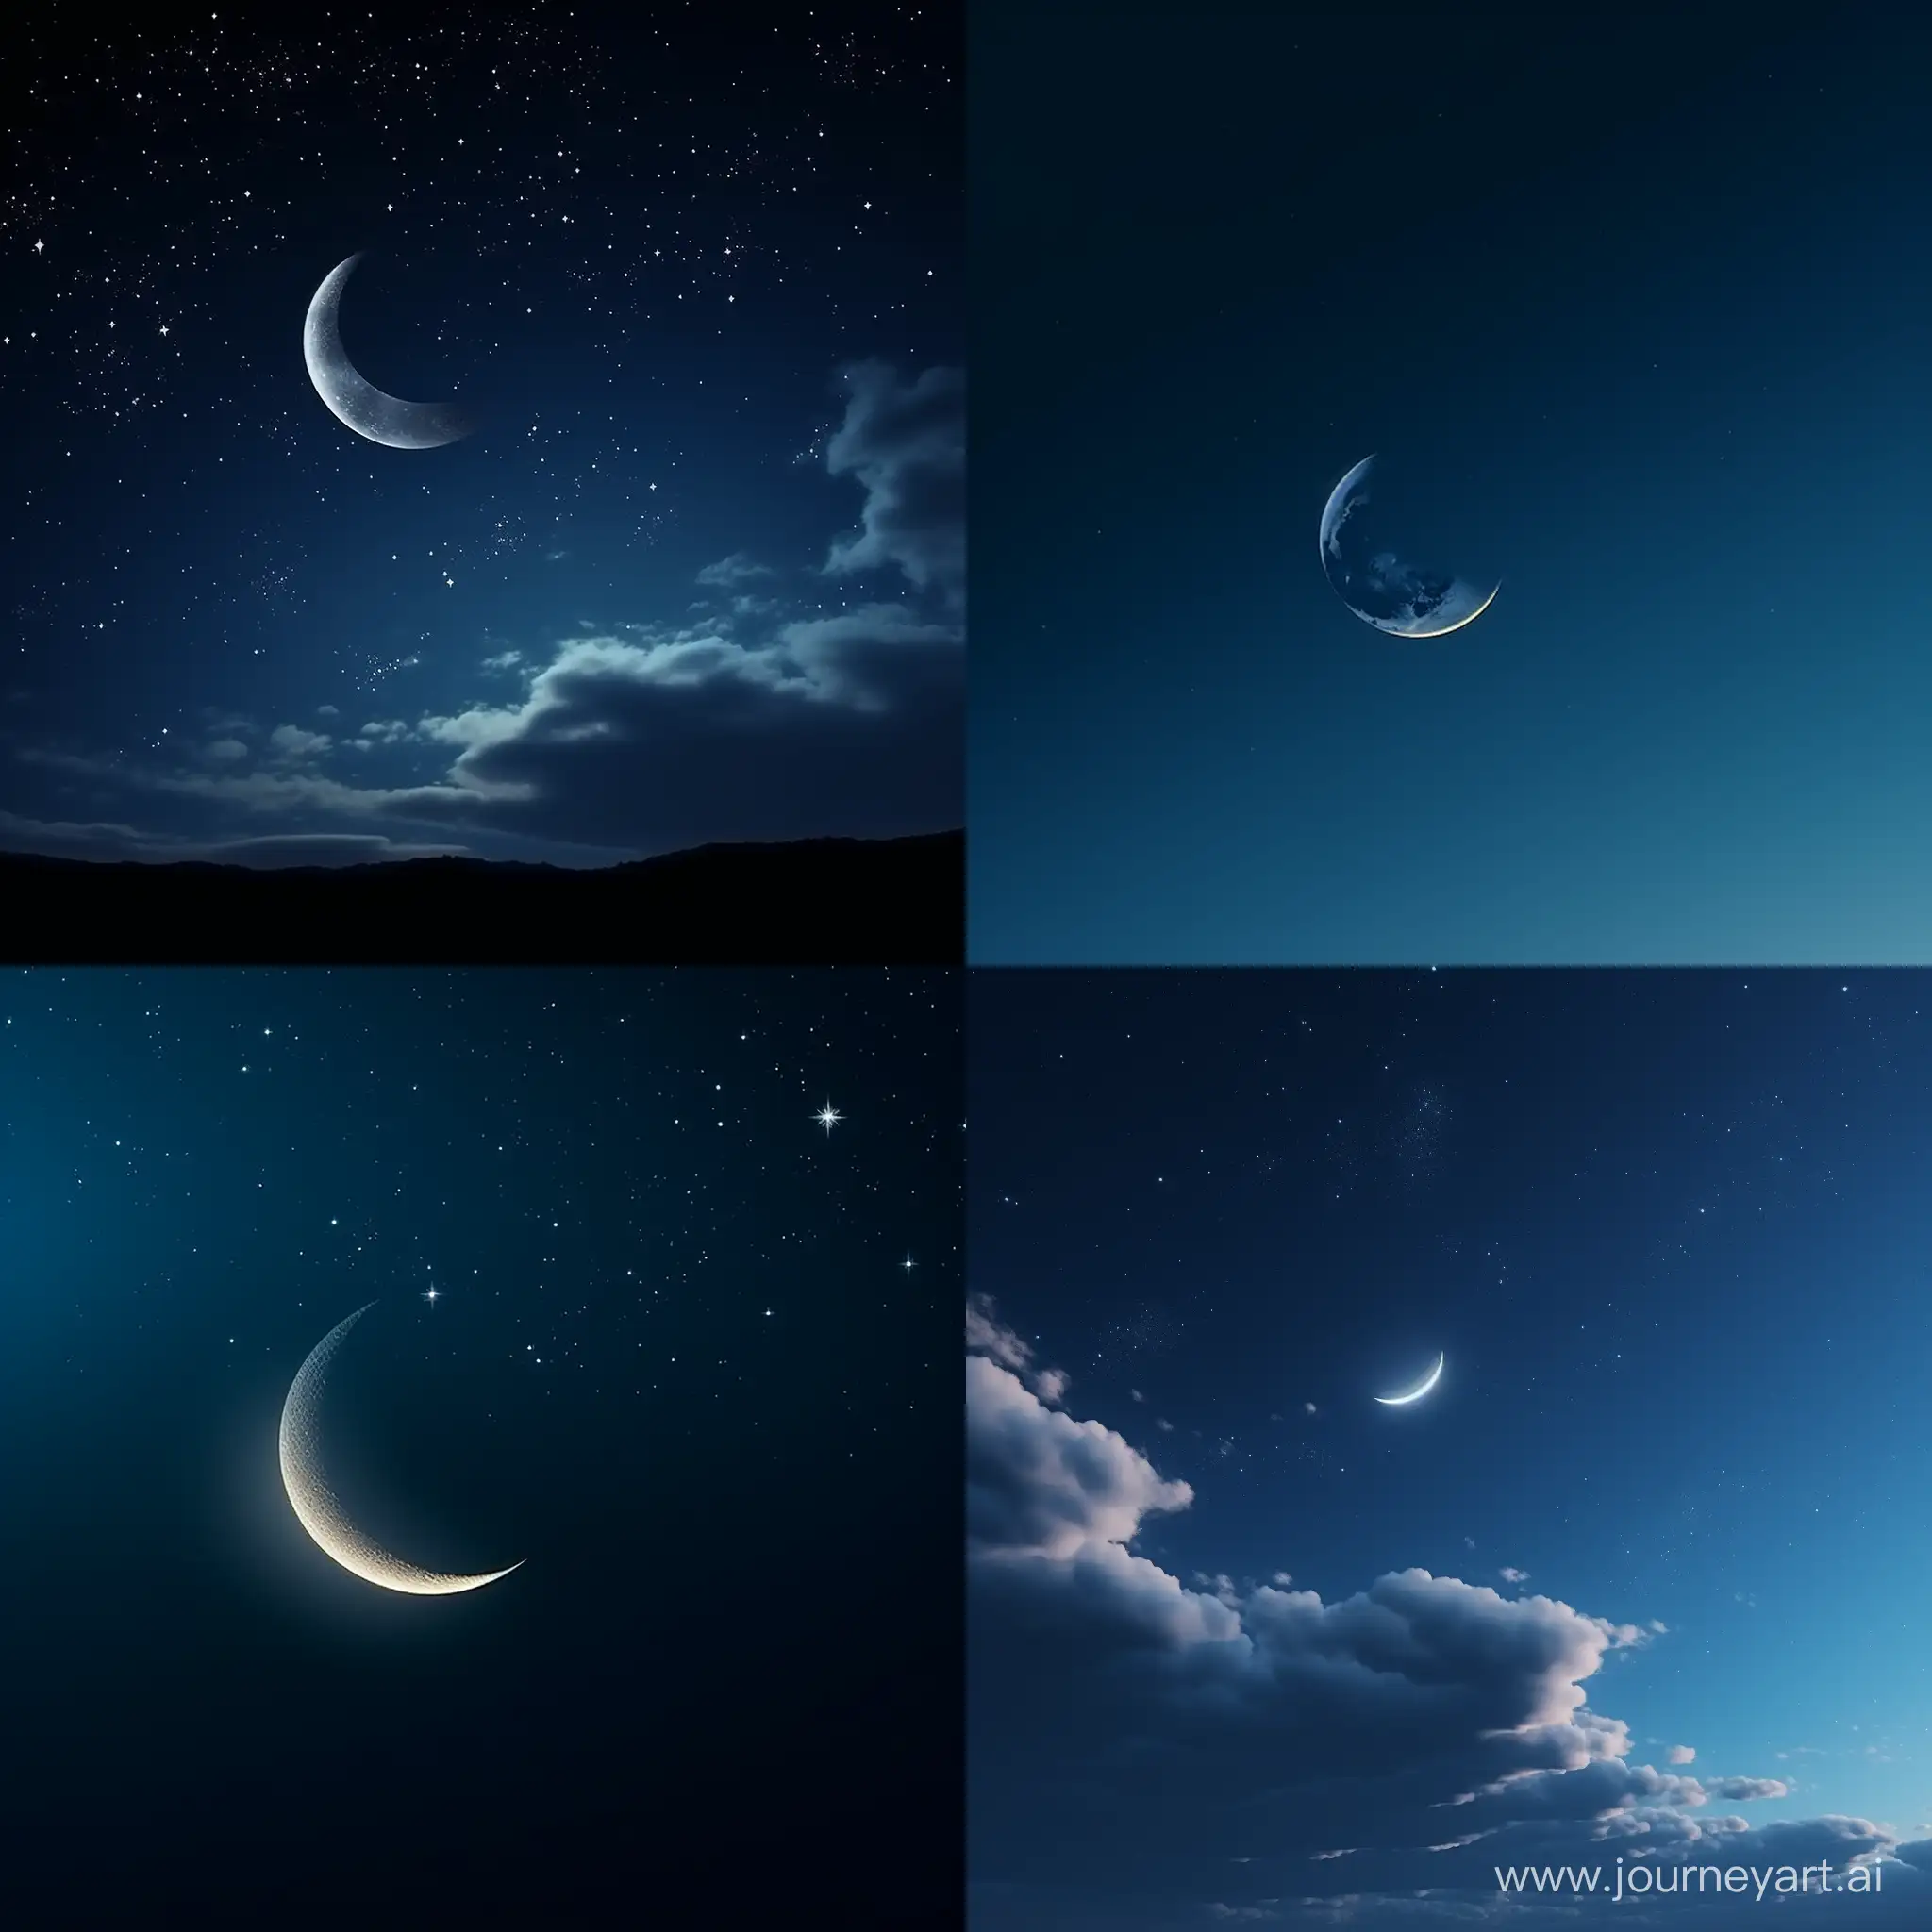 Cinematic-Navy-Blue-Sky-with-Crescent-Moon